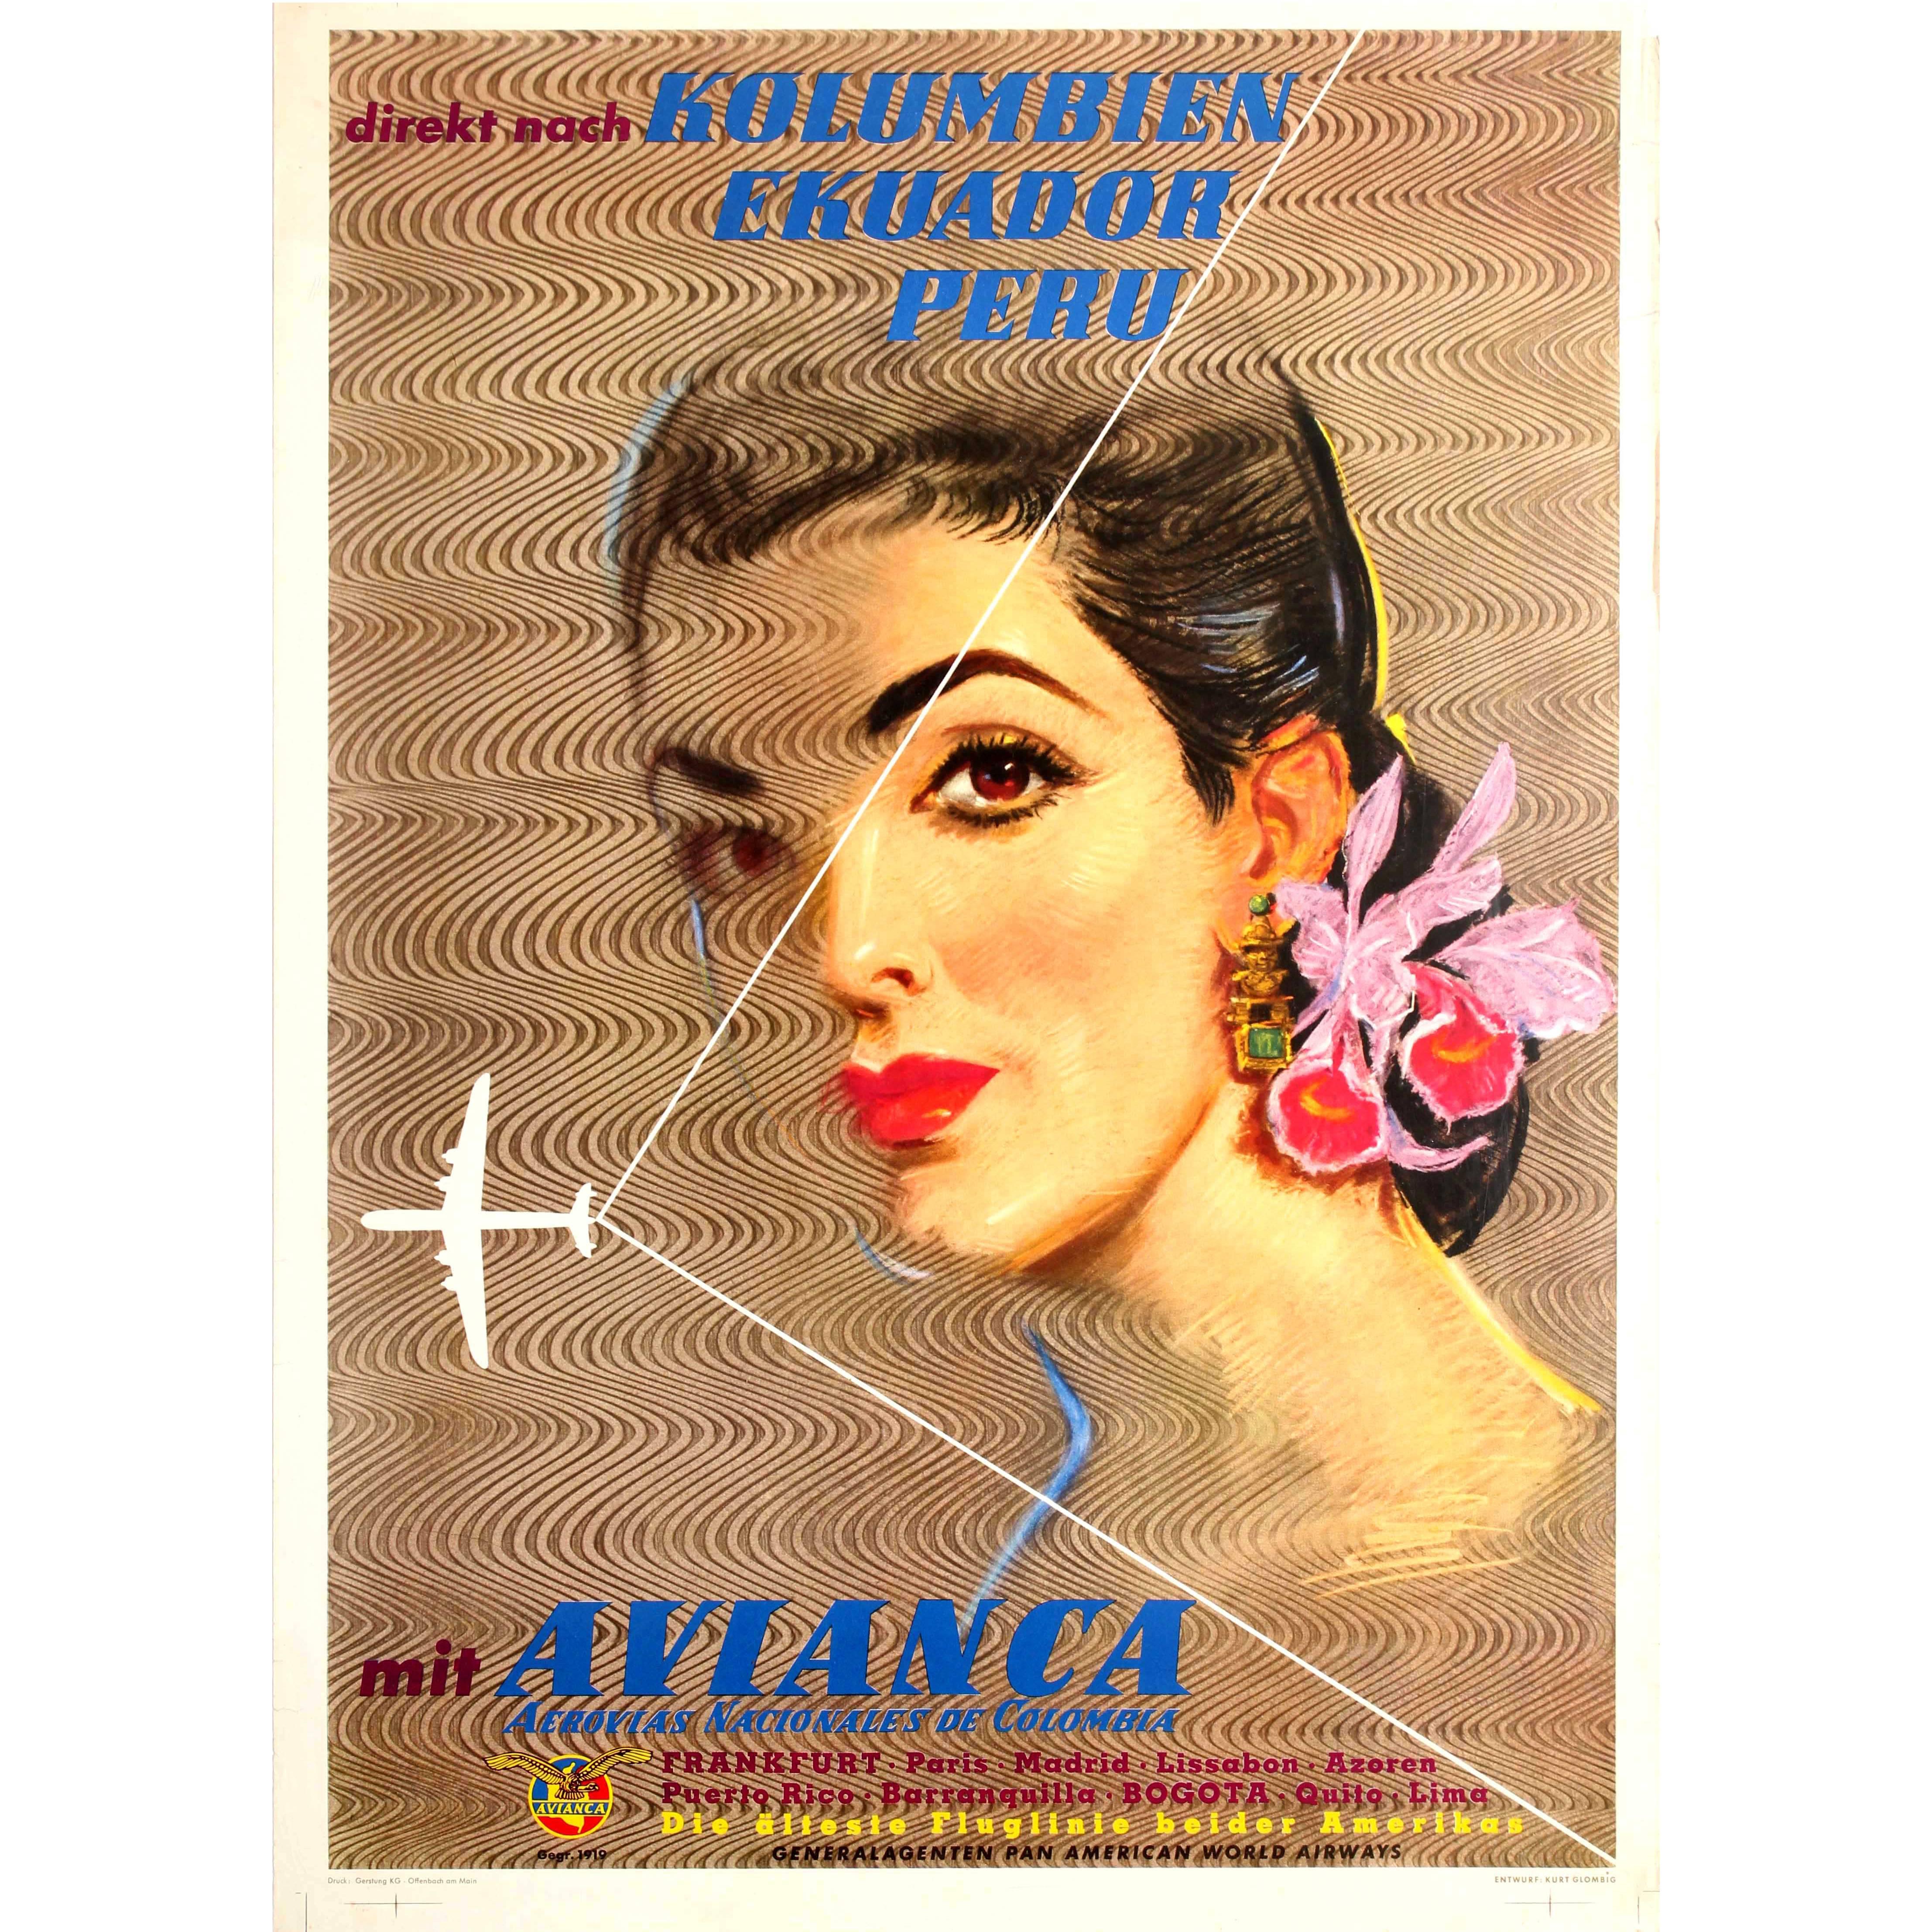 Original Vintage Airline Poster for Colombia Ecuador Peru by Avianca and Pan Am